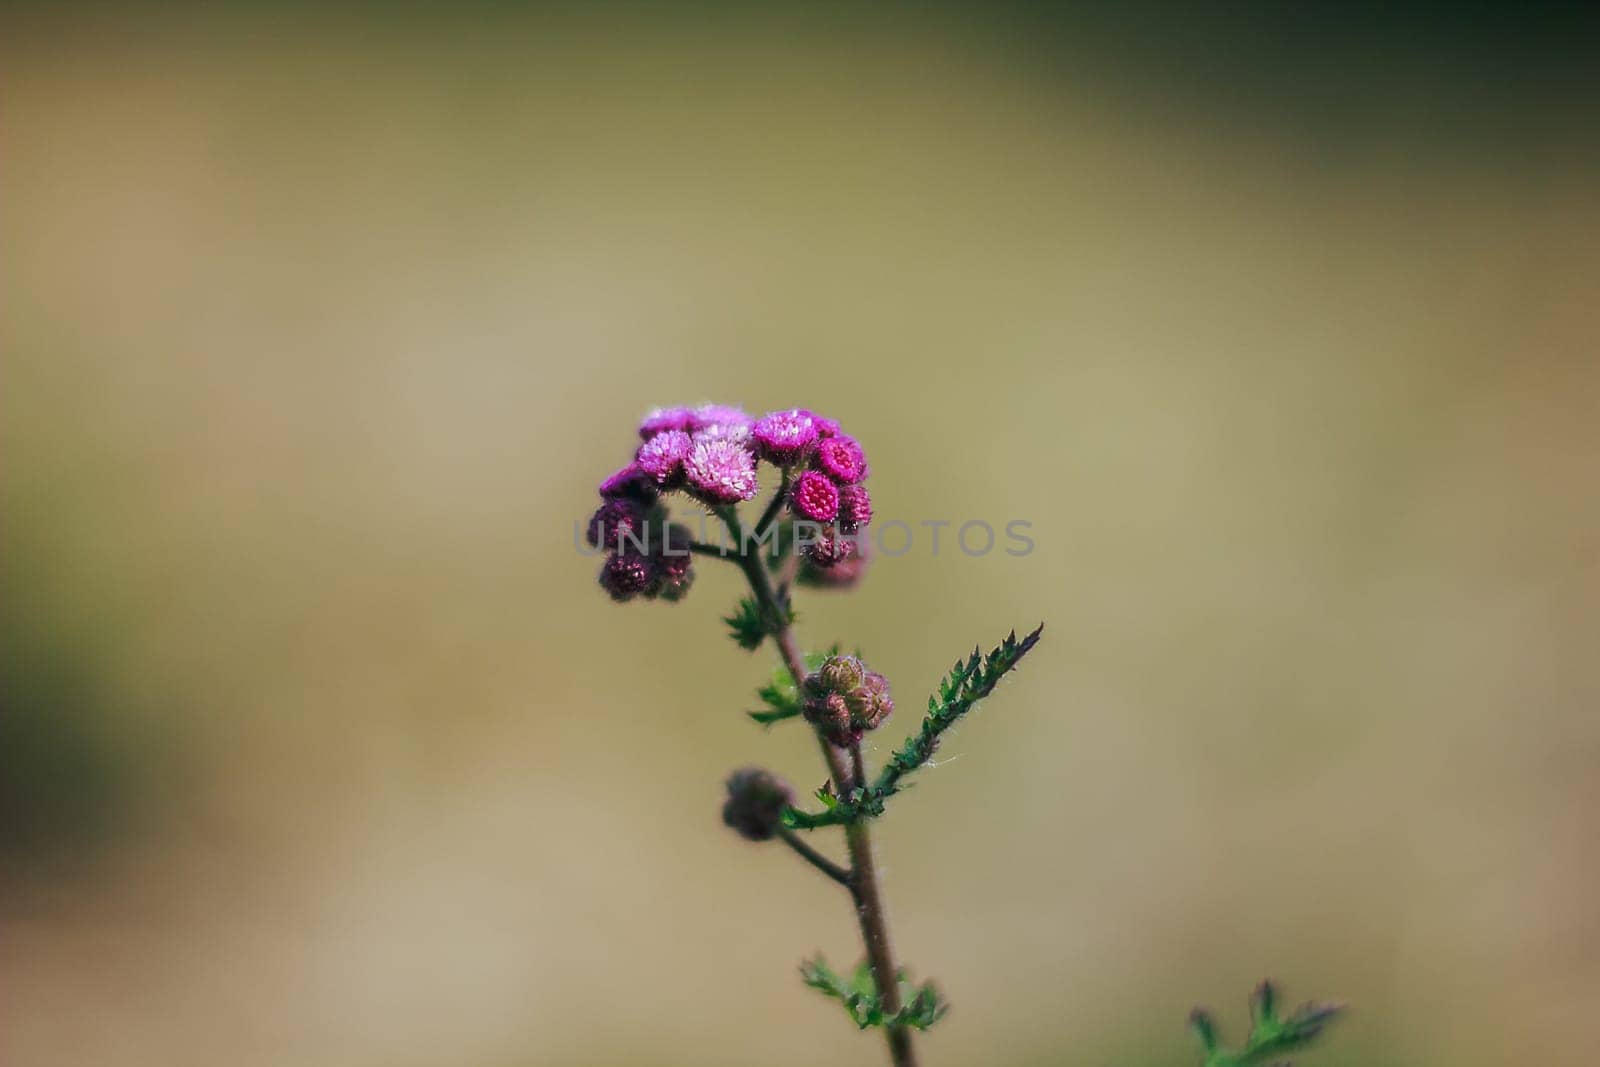 Pink grass flowers in nature, which is a kind of weed by Puripatt